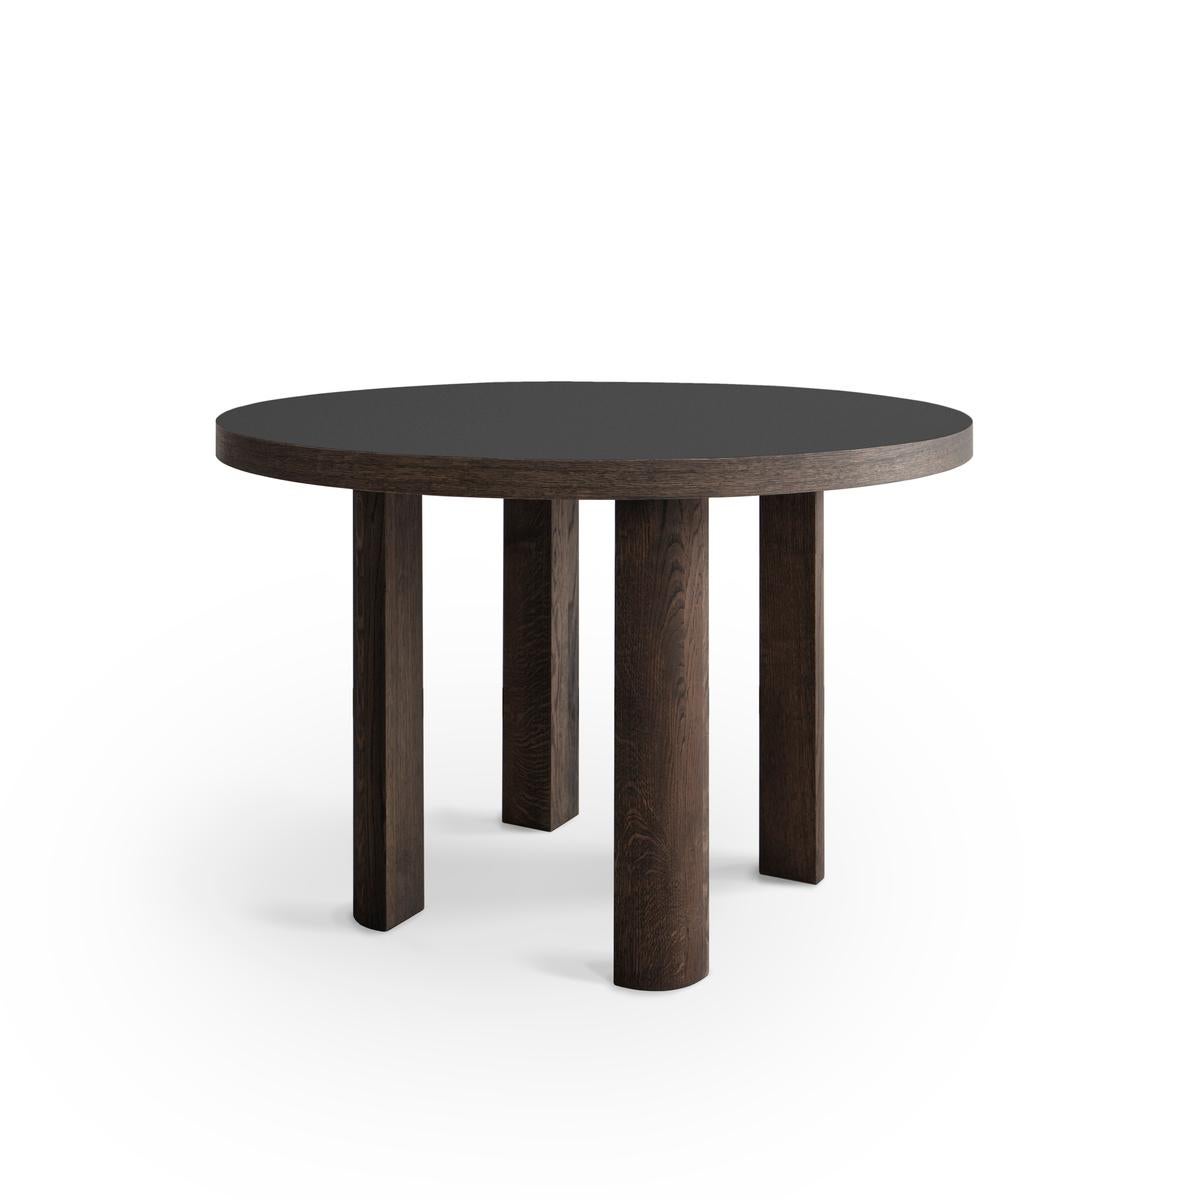 Organic Modern Contemporary Round Table 'Quarter', Smoked Oak / White top For Sale